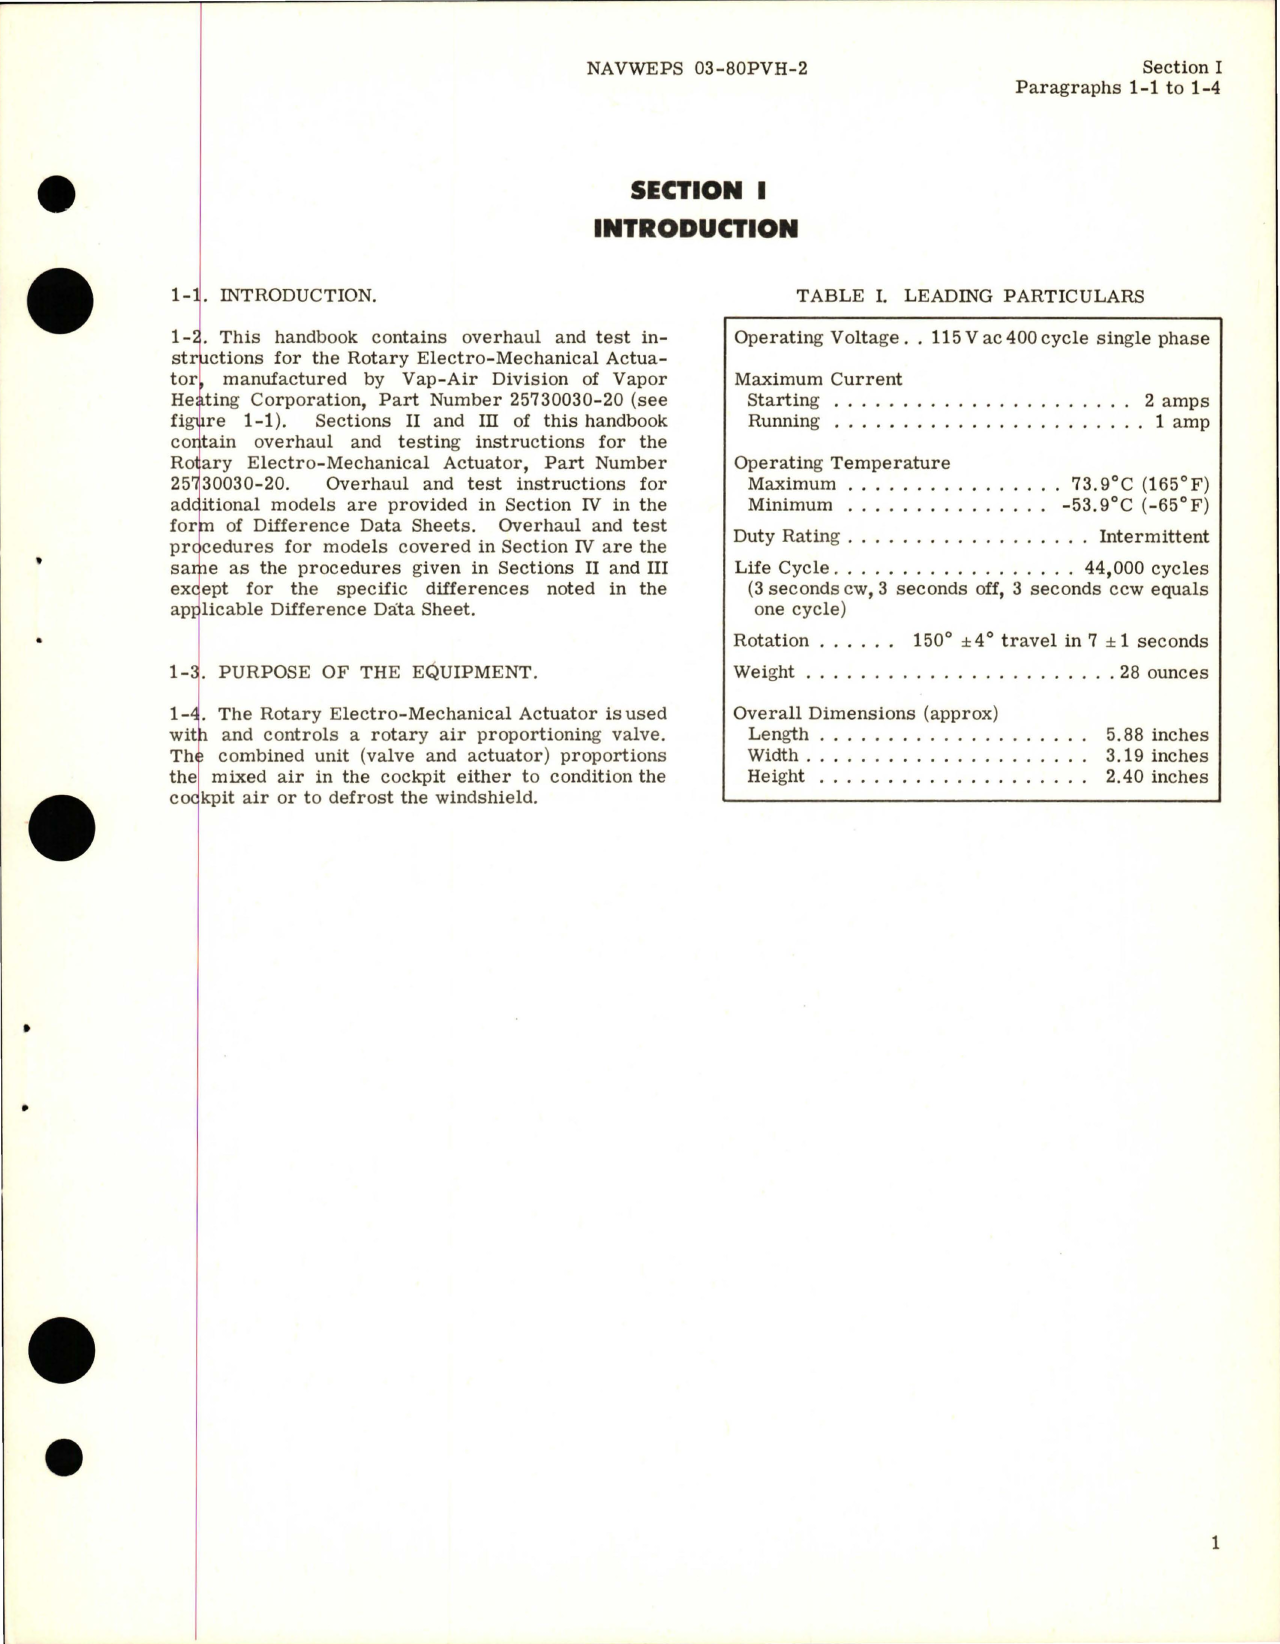 Sample page 5 from AirCorps Library document: Overhaul Instructions for Rotary Electro-Mechanical Actuator - Parts 25730030-02, 25730030-20, 25730060-01, and 25730060-20 